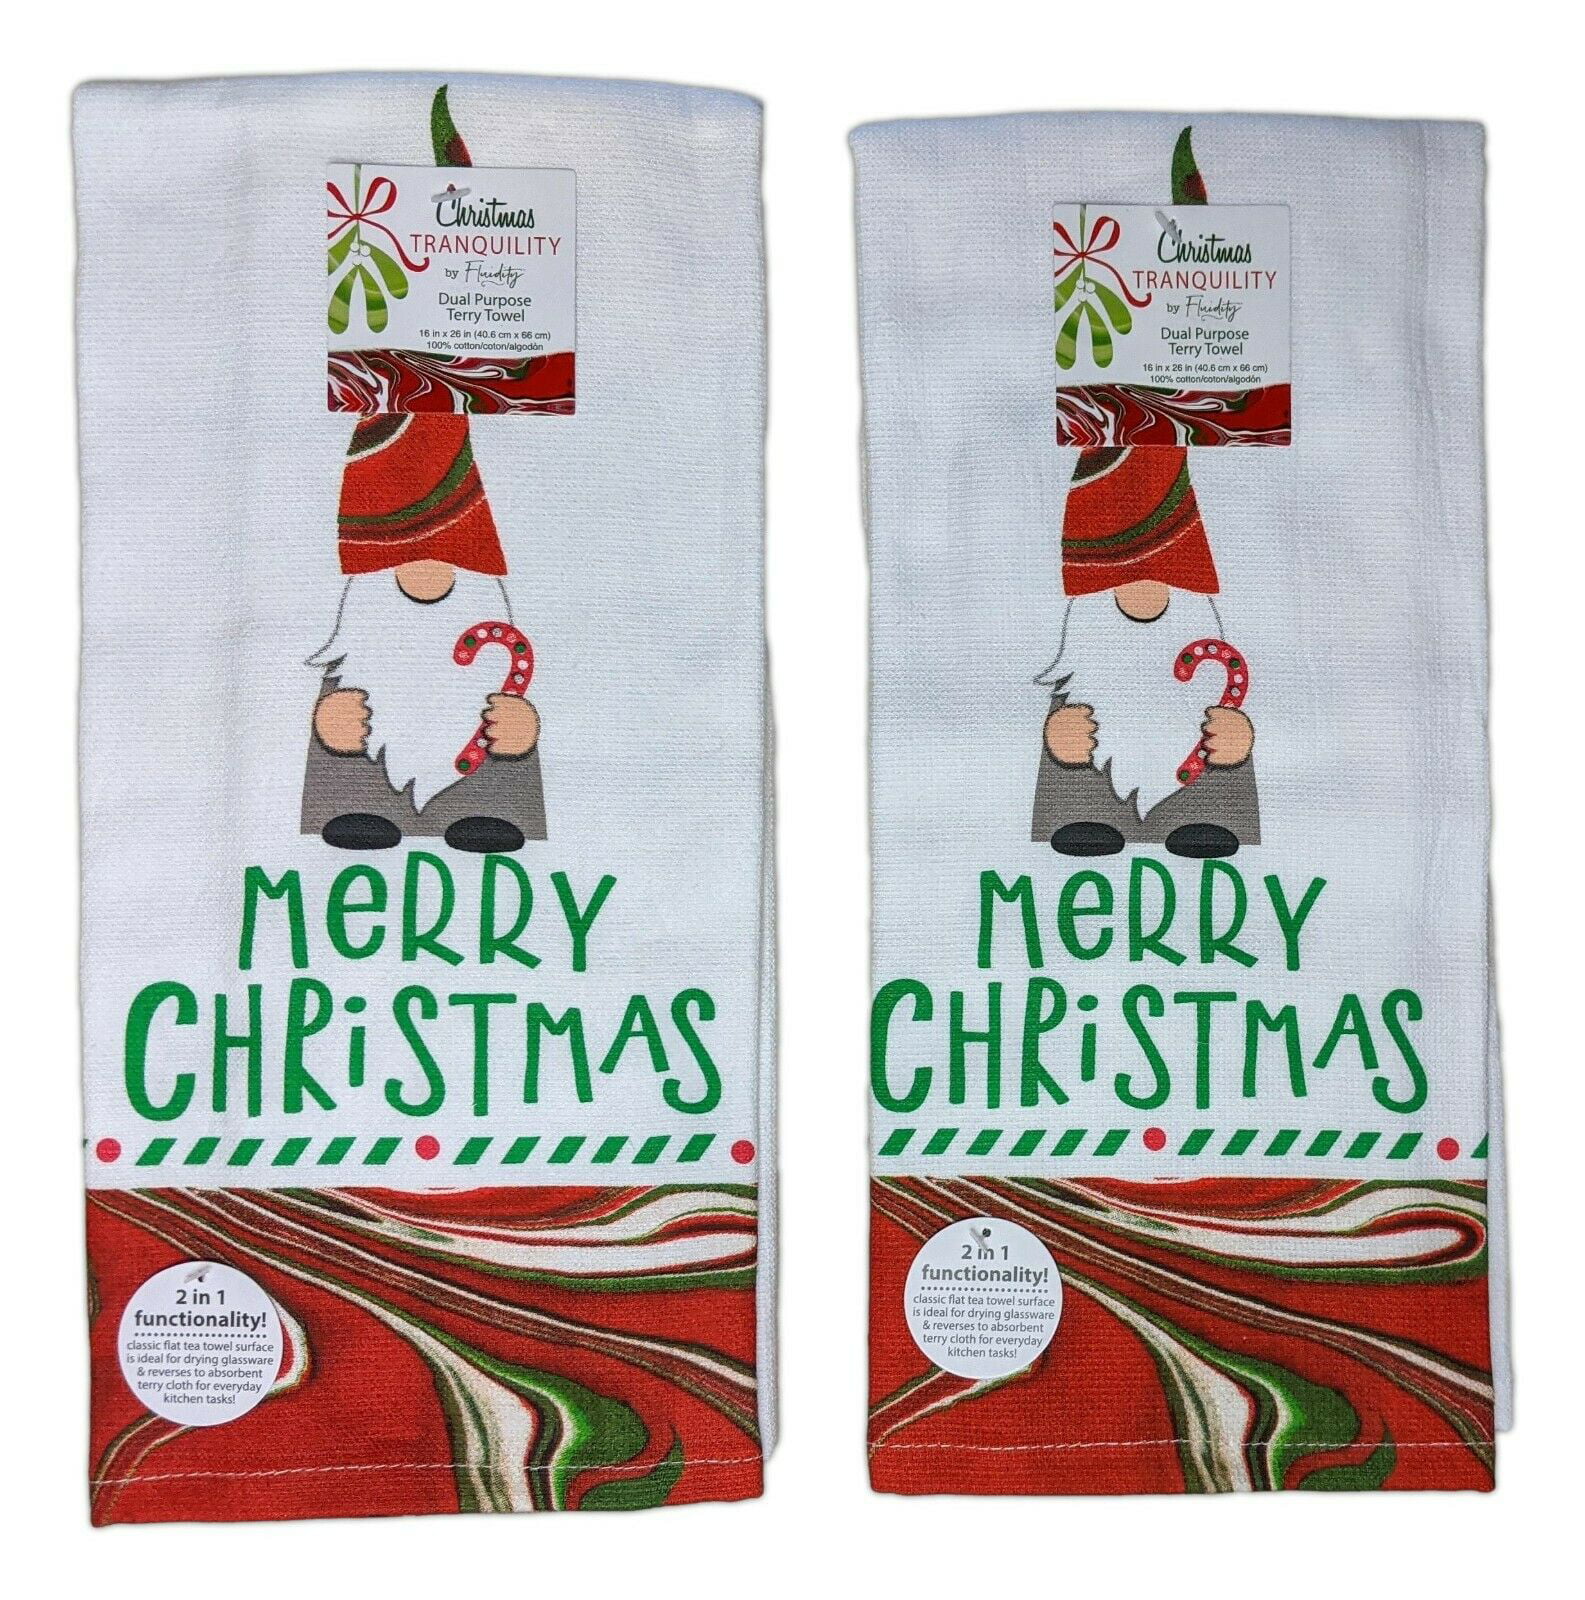 KitchenAid Christmas Colors Kitchen Towels Set of 2 Holiday Towels Green Red 